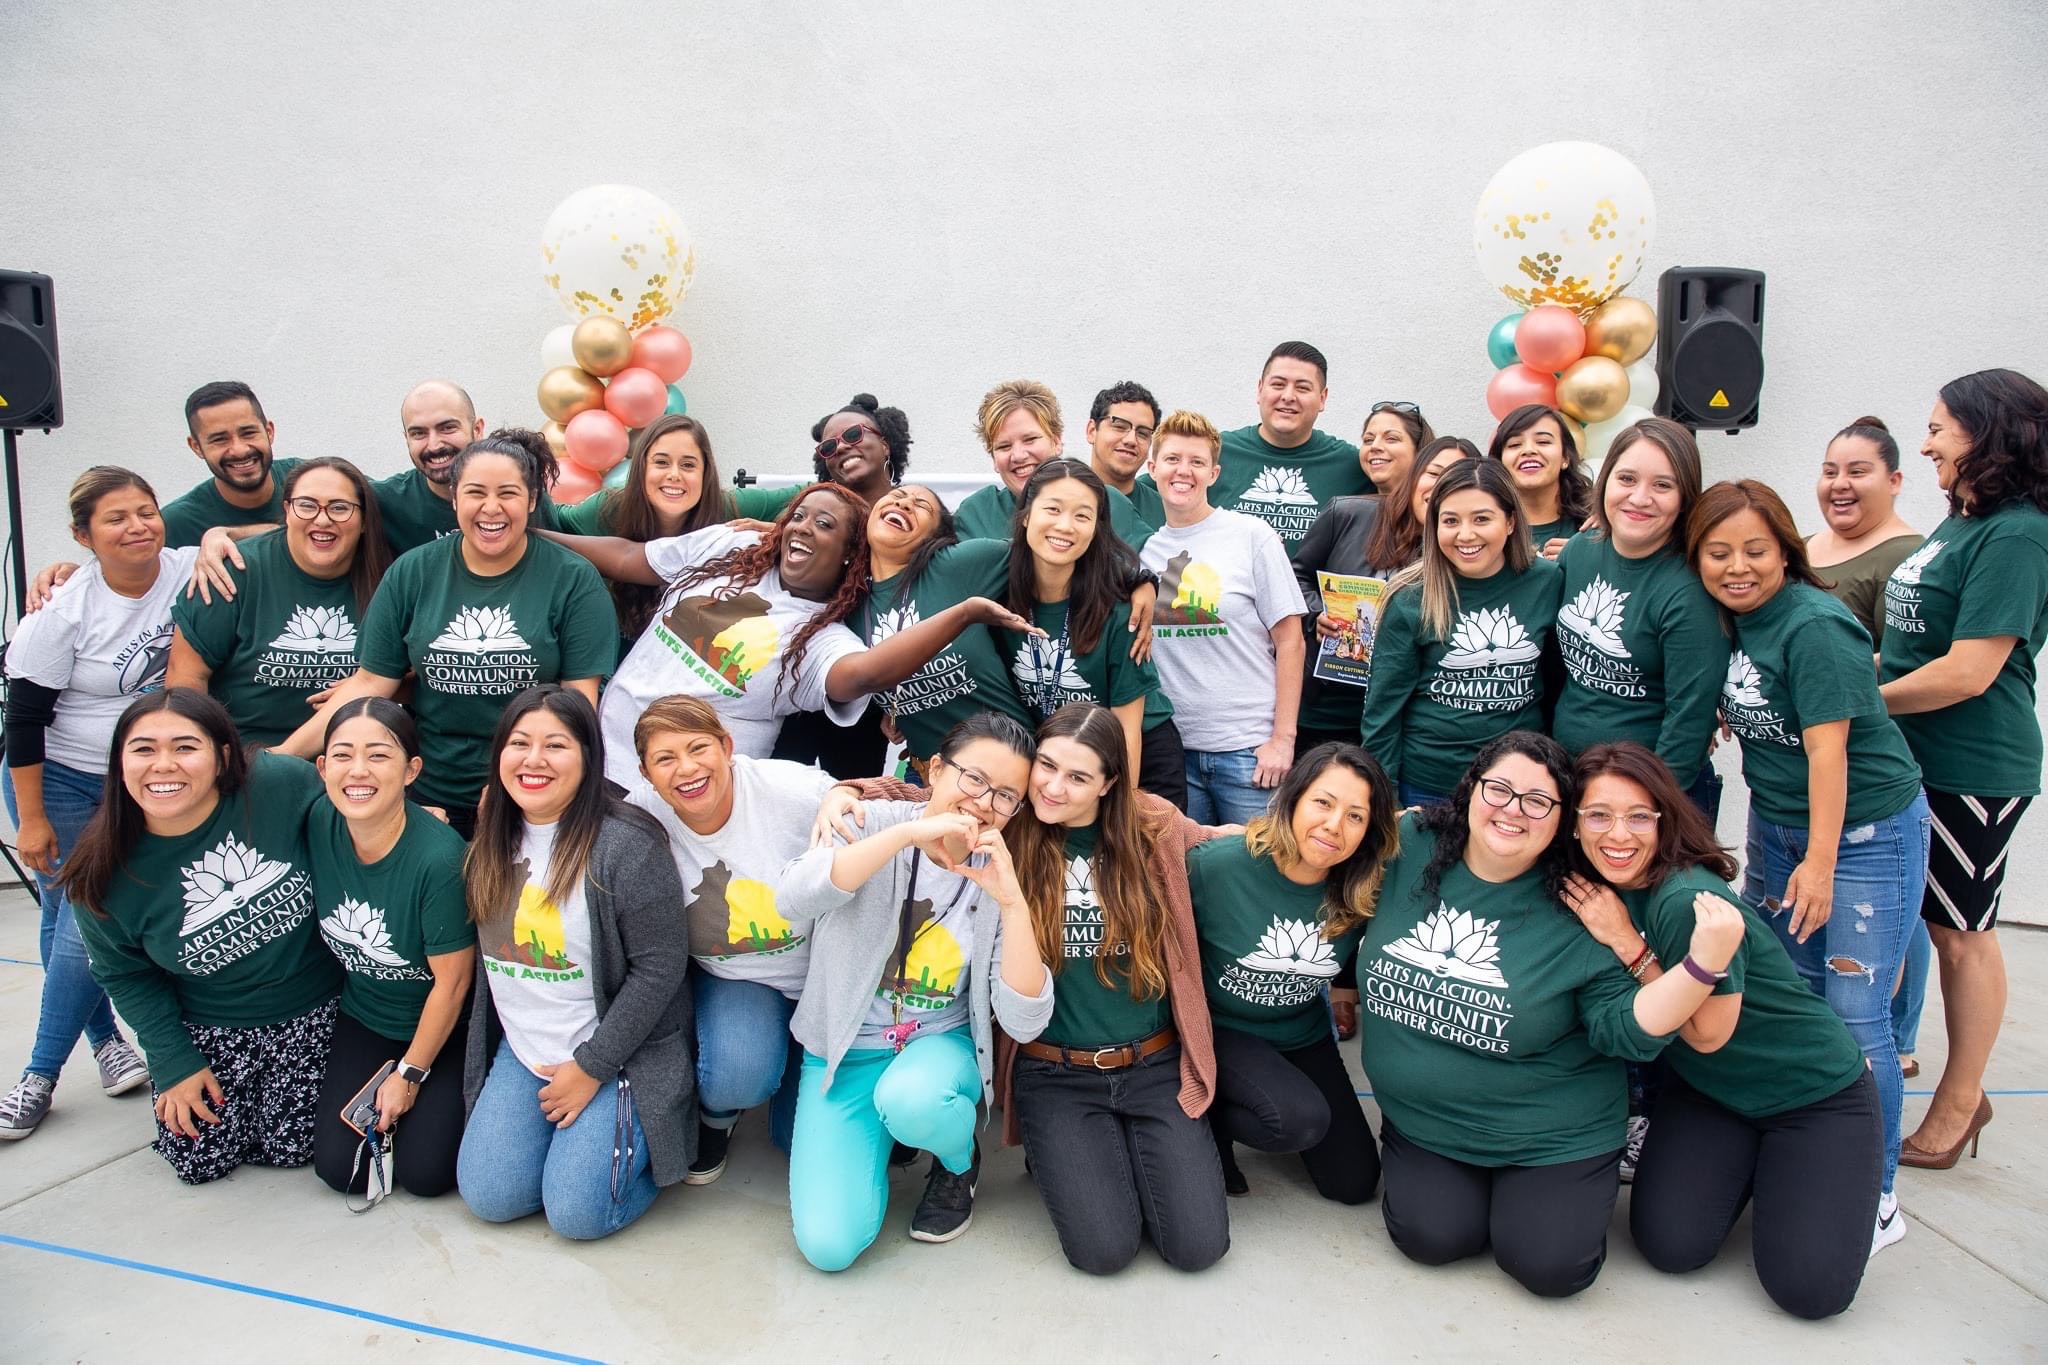 PHOTO: The staff at Arts in Action Community Charter Schools in East Los Angeles.